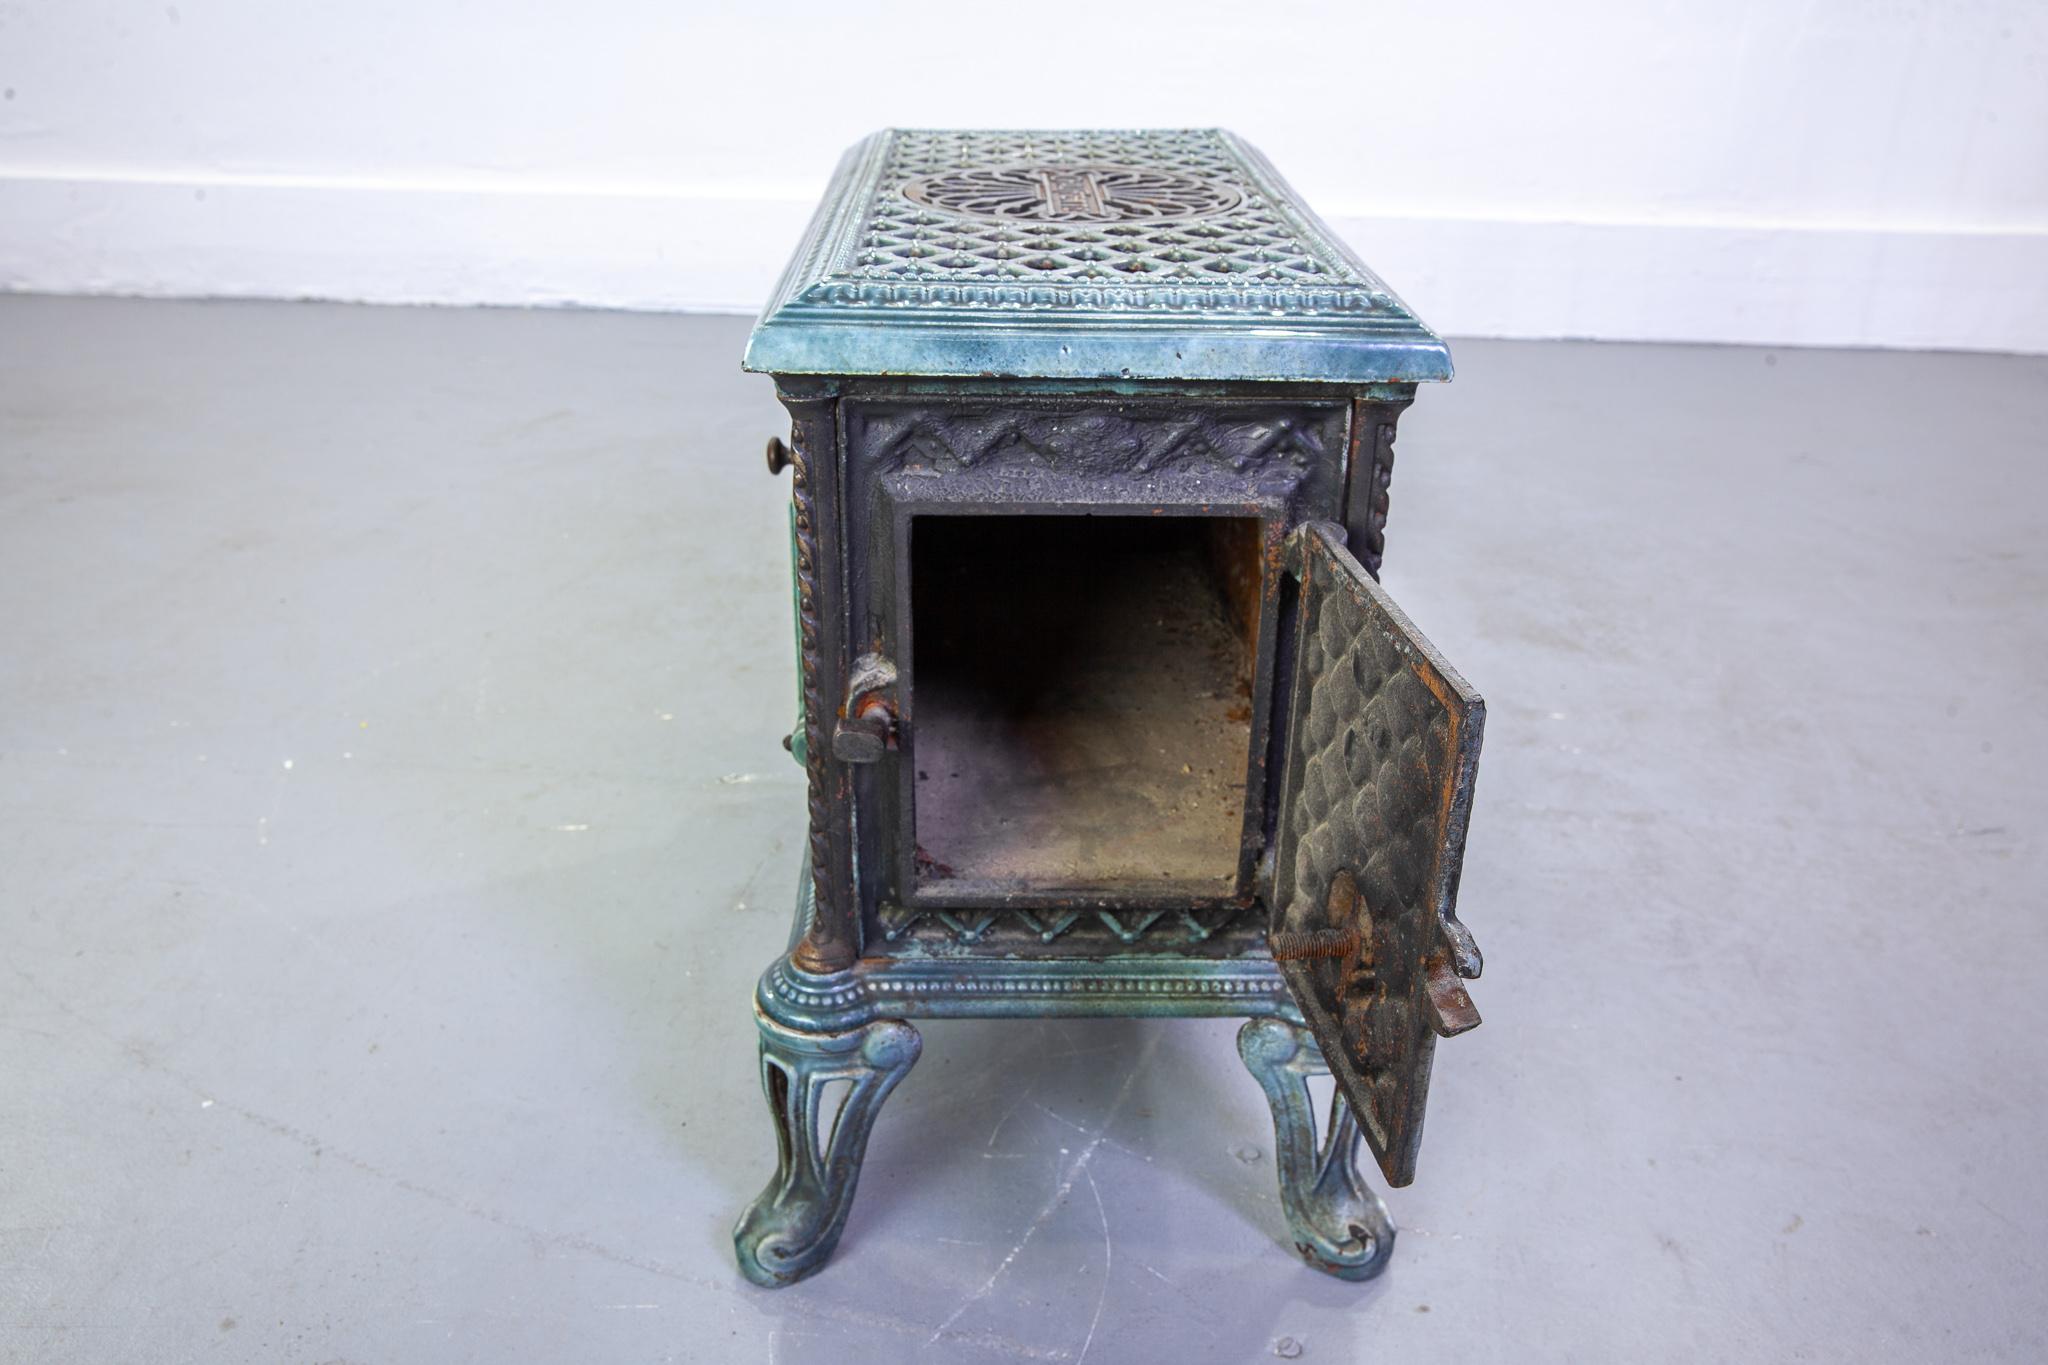 Mid-20th Century 20th Century French Godin Chaufette Wood Stove in Vintage Green Cast Iron